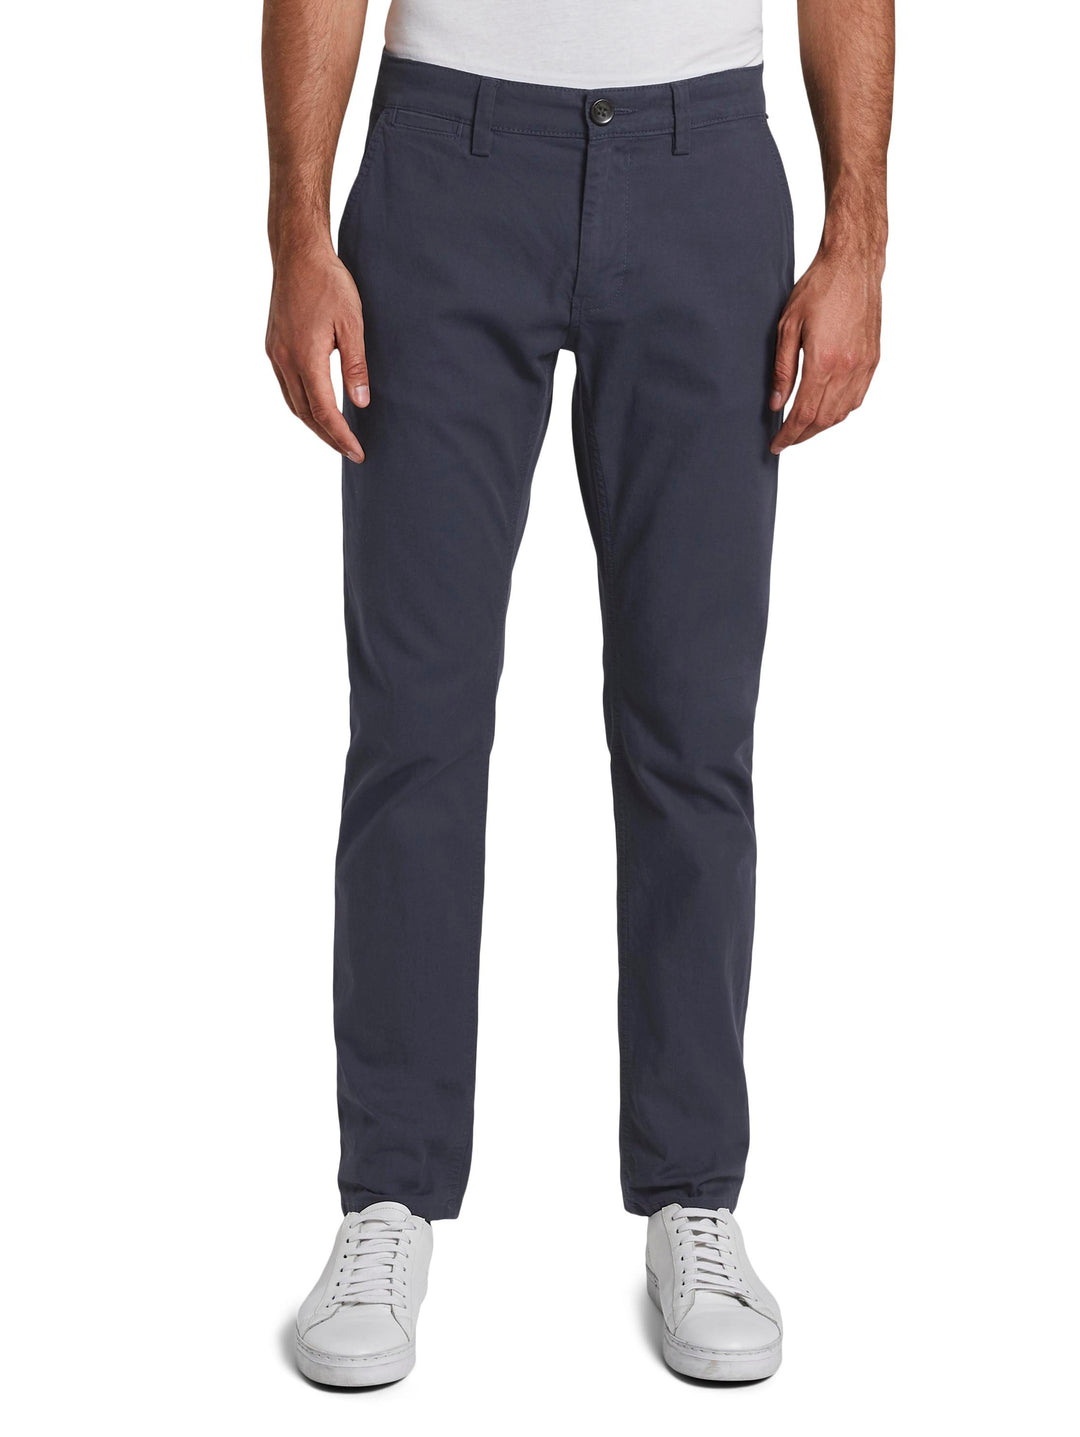 WASHED STRUCTURE CHINO